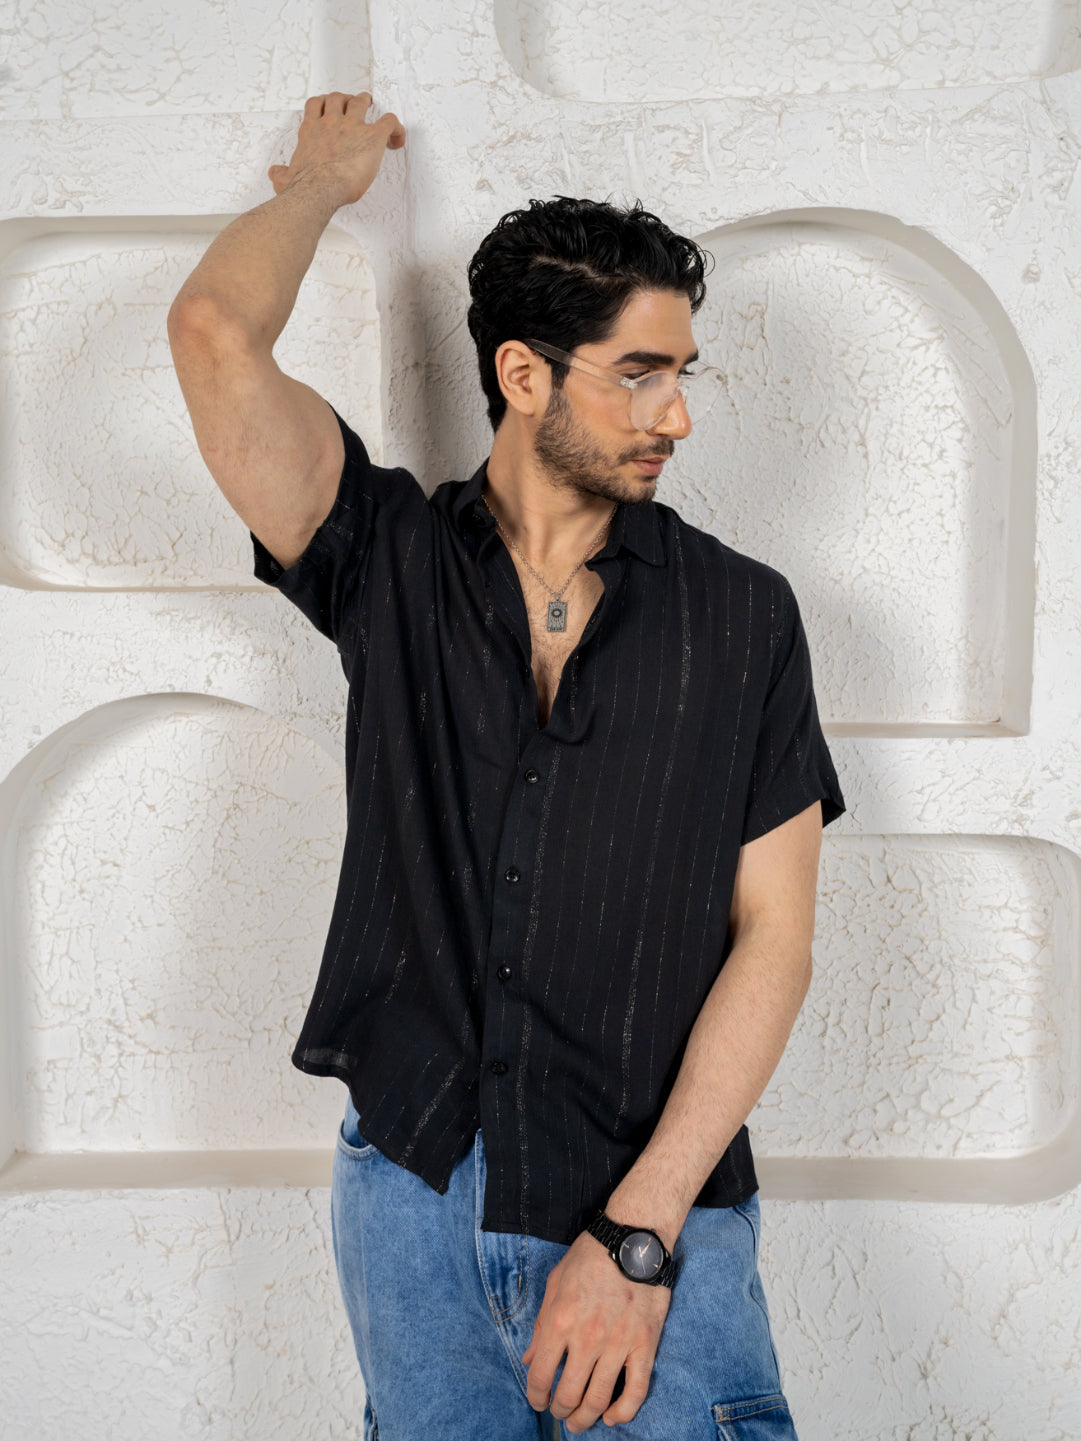 Firangi Yarn Relaxed Fit Super Flowy Re-engineered Cotton Lurex- Half Sleeves Party Shirt Black Silver